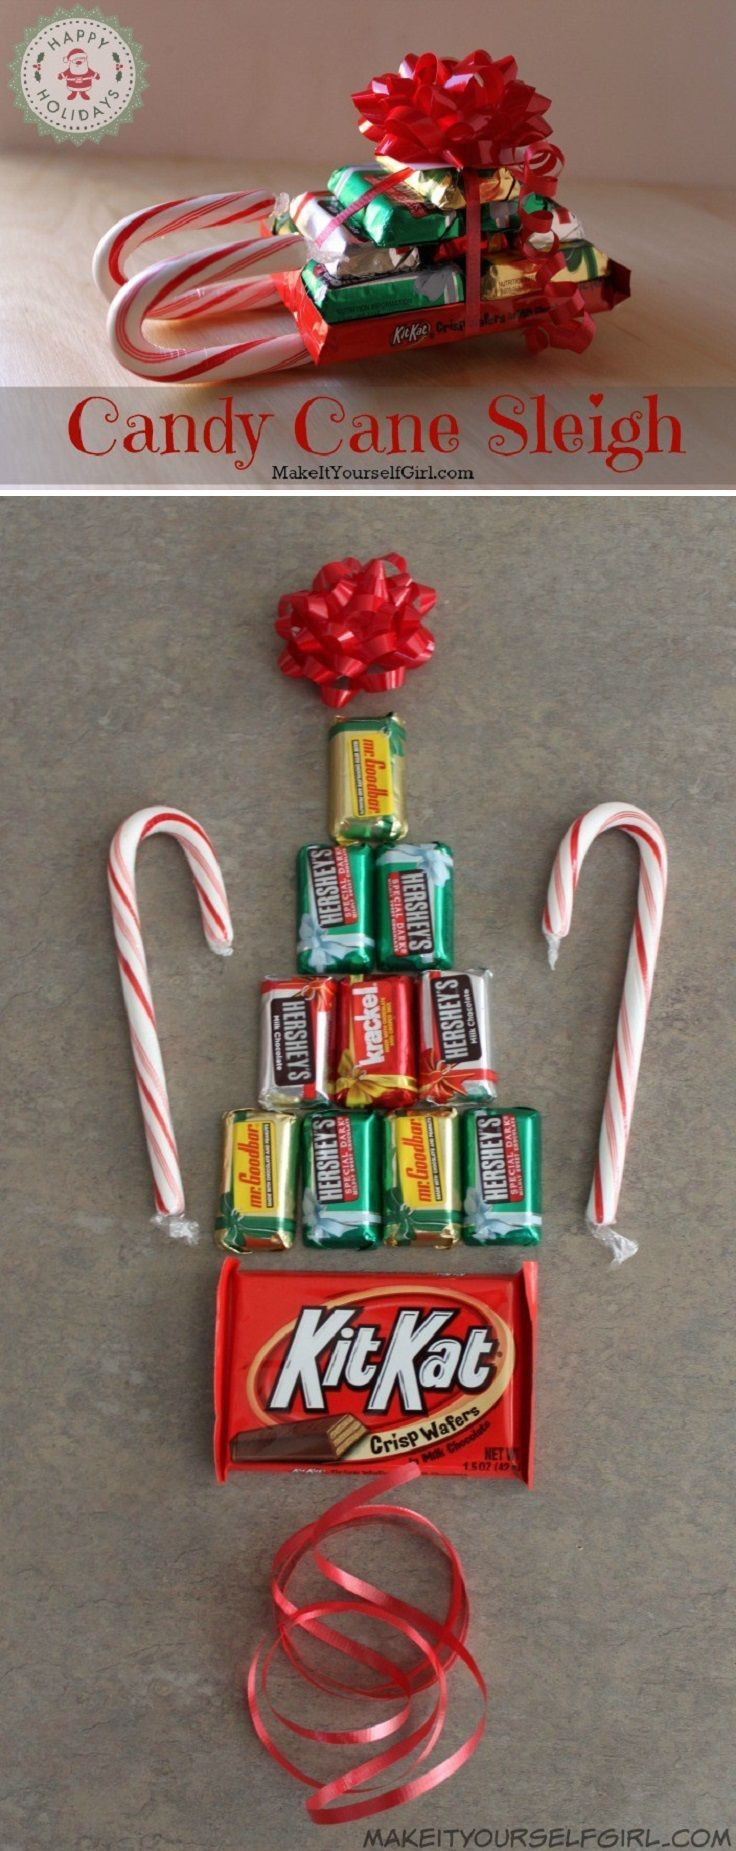 Christmas Candy Craft Ideas
 Best 25 Christmas party favors ideas on Pinterest